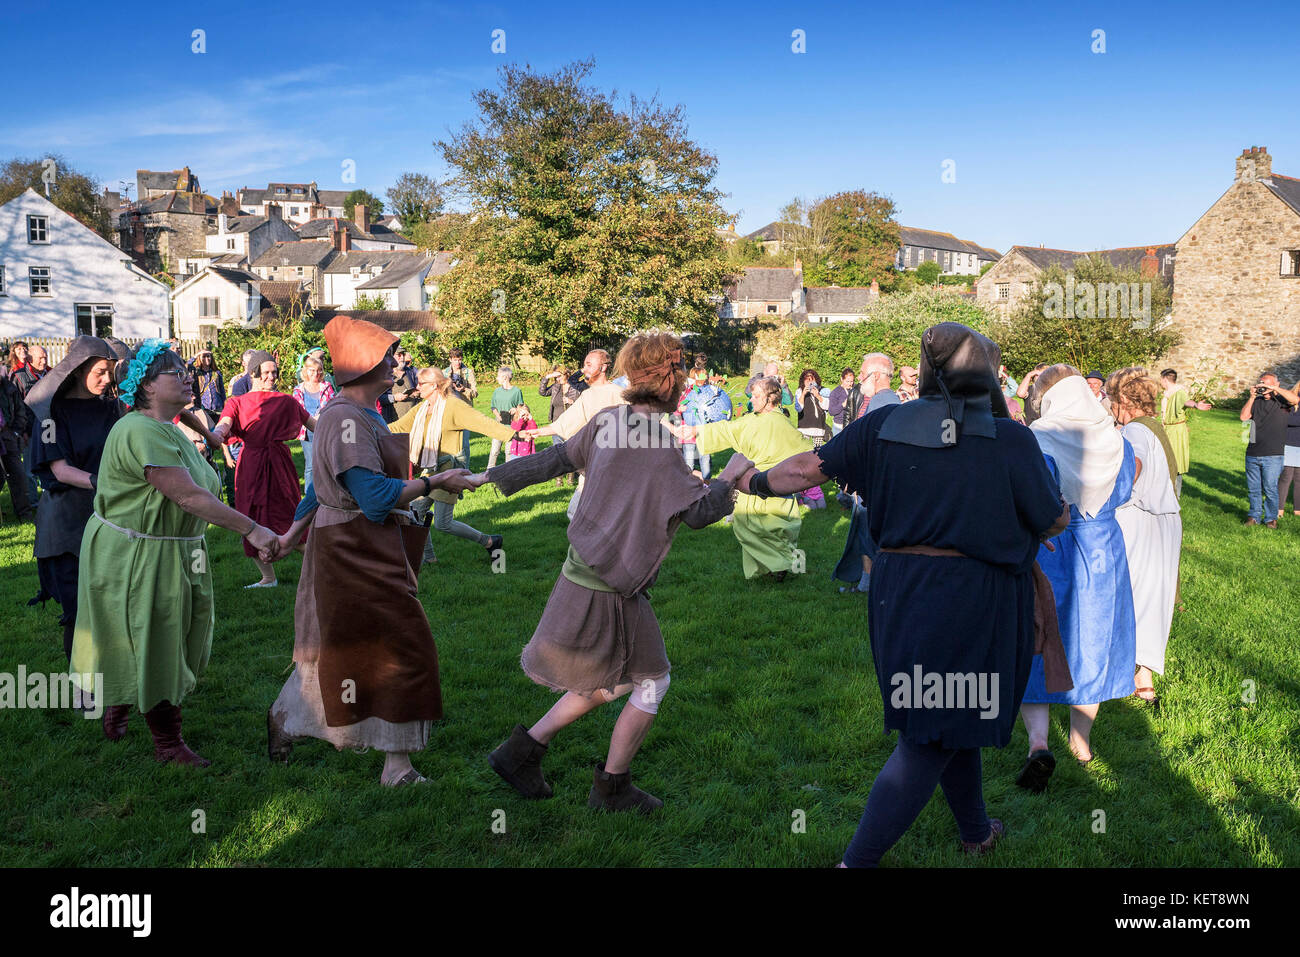 The Ordinalia - Cornish Mystery Plays performed during the Penryn Kemeneth a two day heritage festival at Penryn Cornwall. Stock Photo